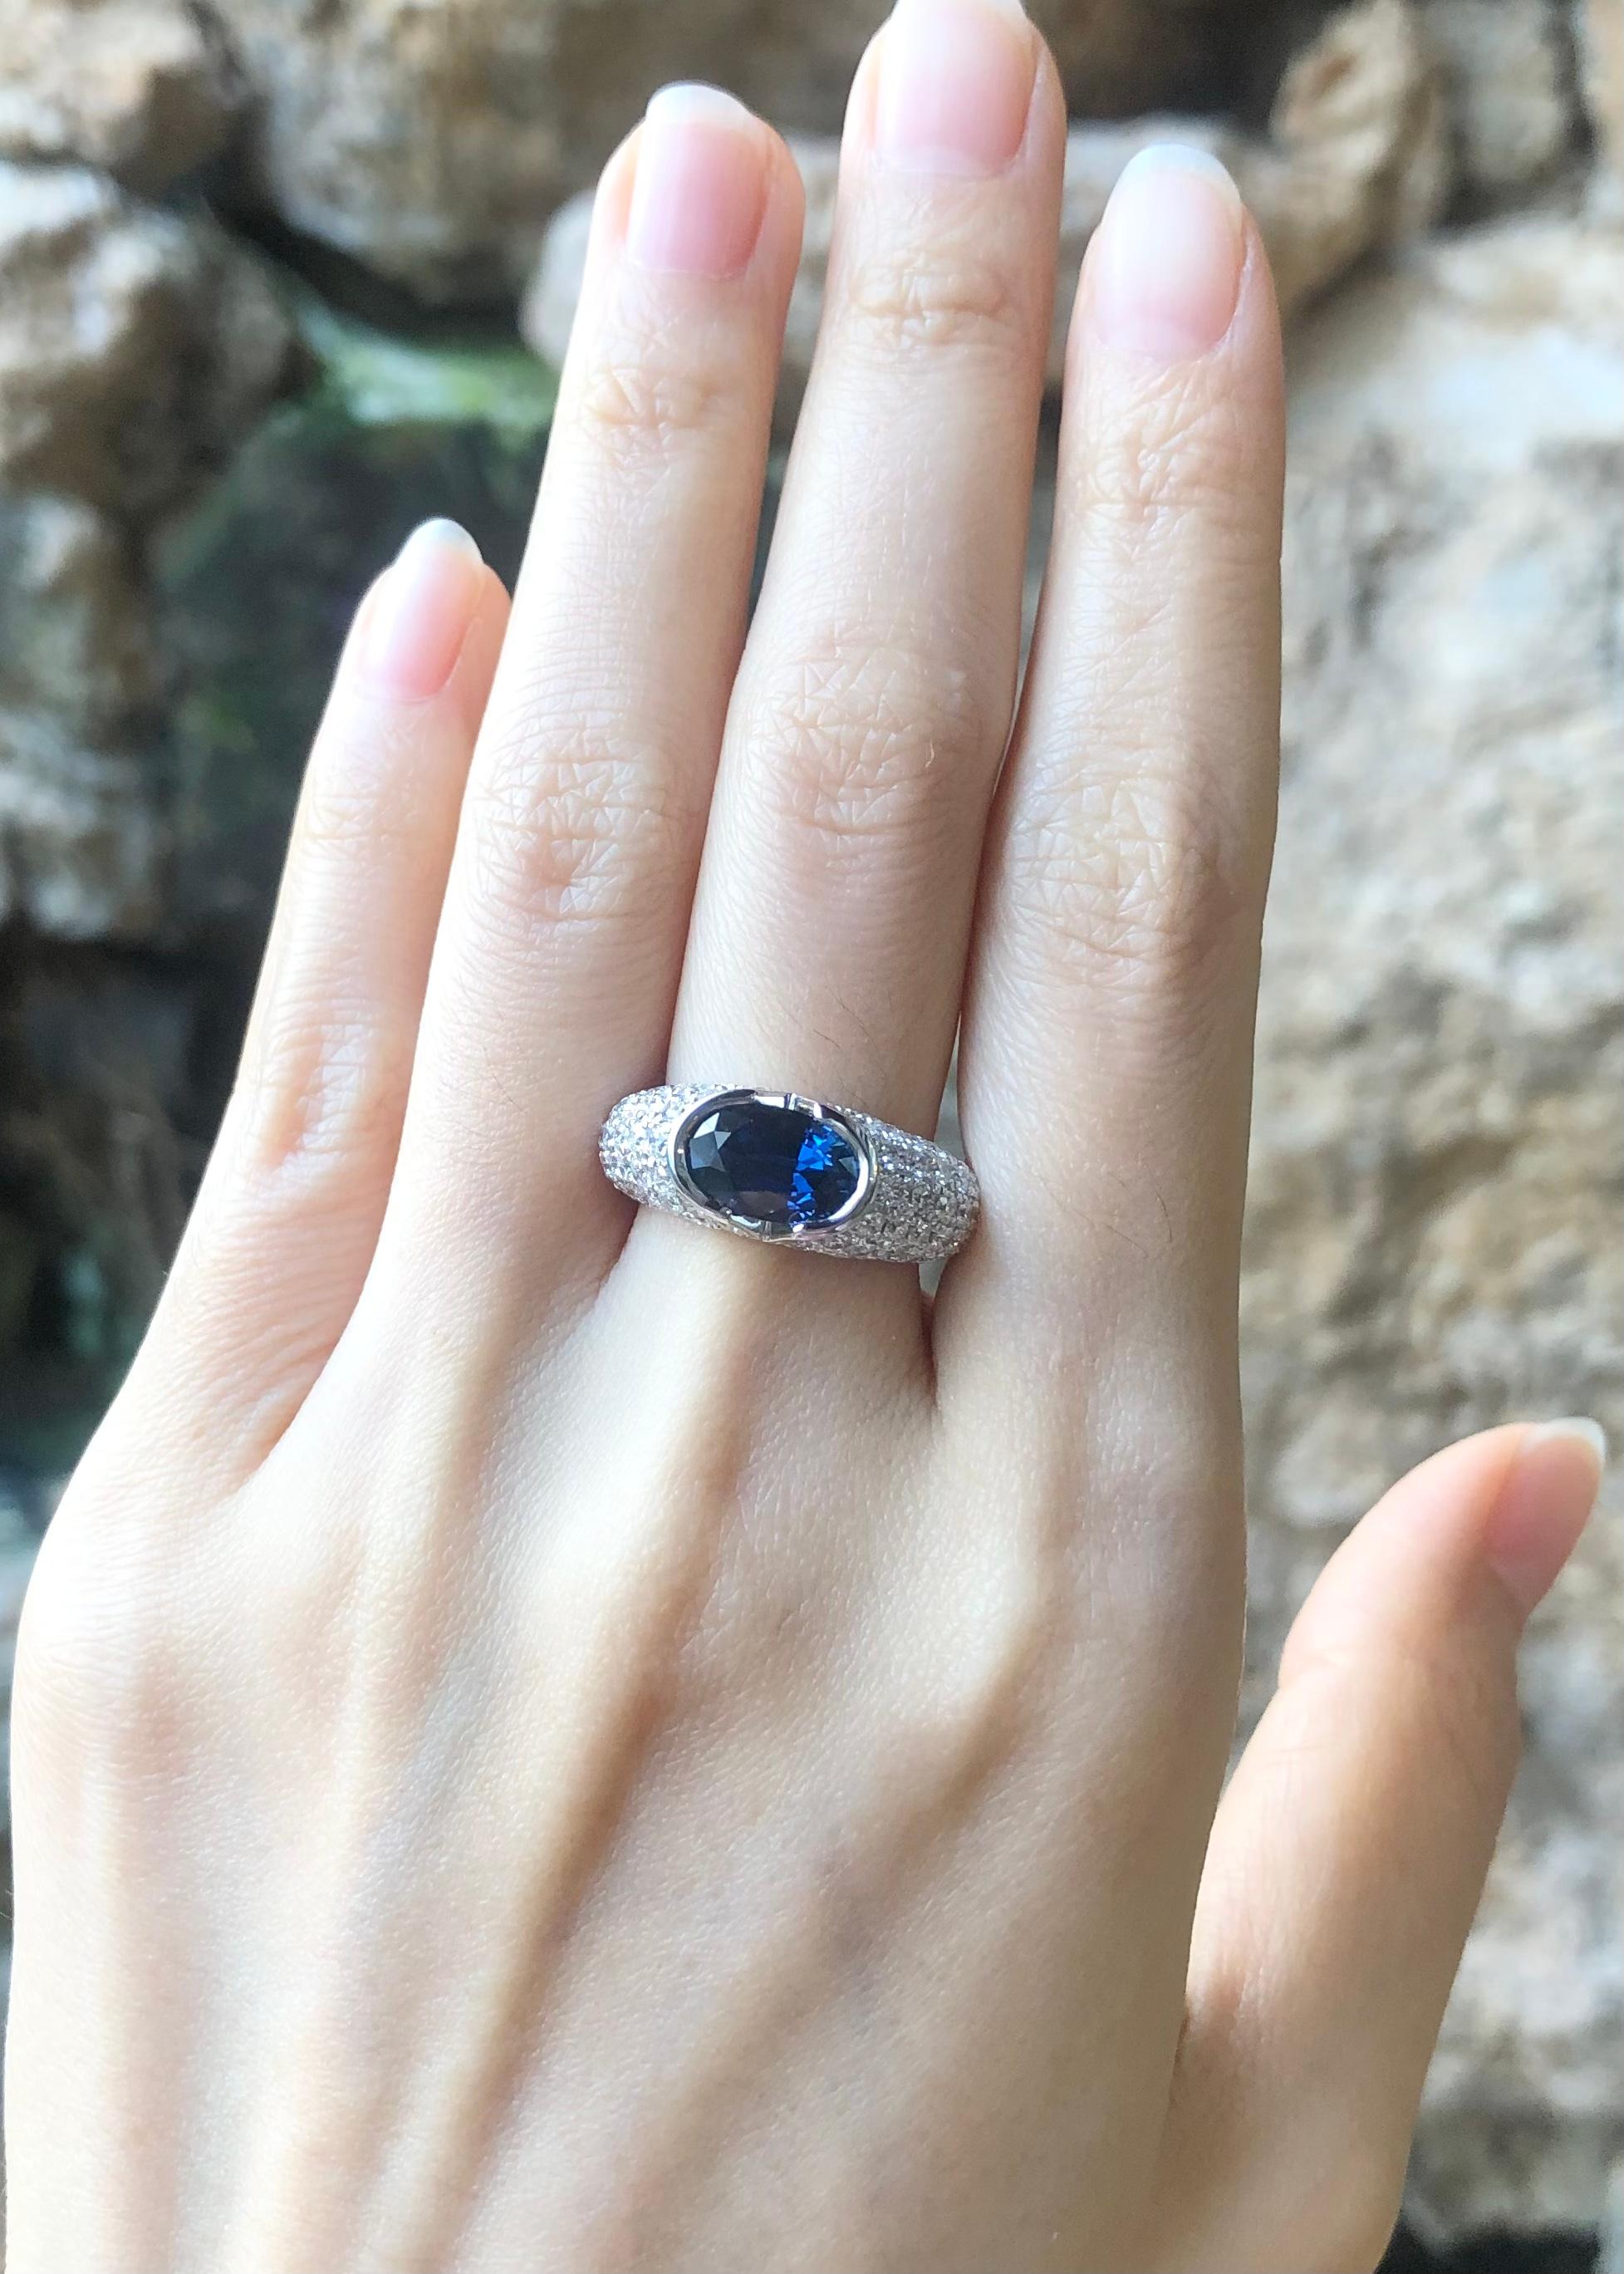 Blue Sapphire 2.72 carats with Diamond 1.83 carats Ring set in 18K White Gold Settings

Width:  1.1 cm 
Length: 0.7 cm
Ring Size: 53
Total Weight: 9.0 grams

